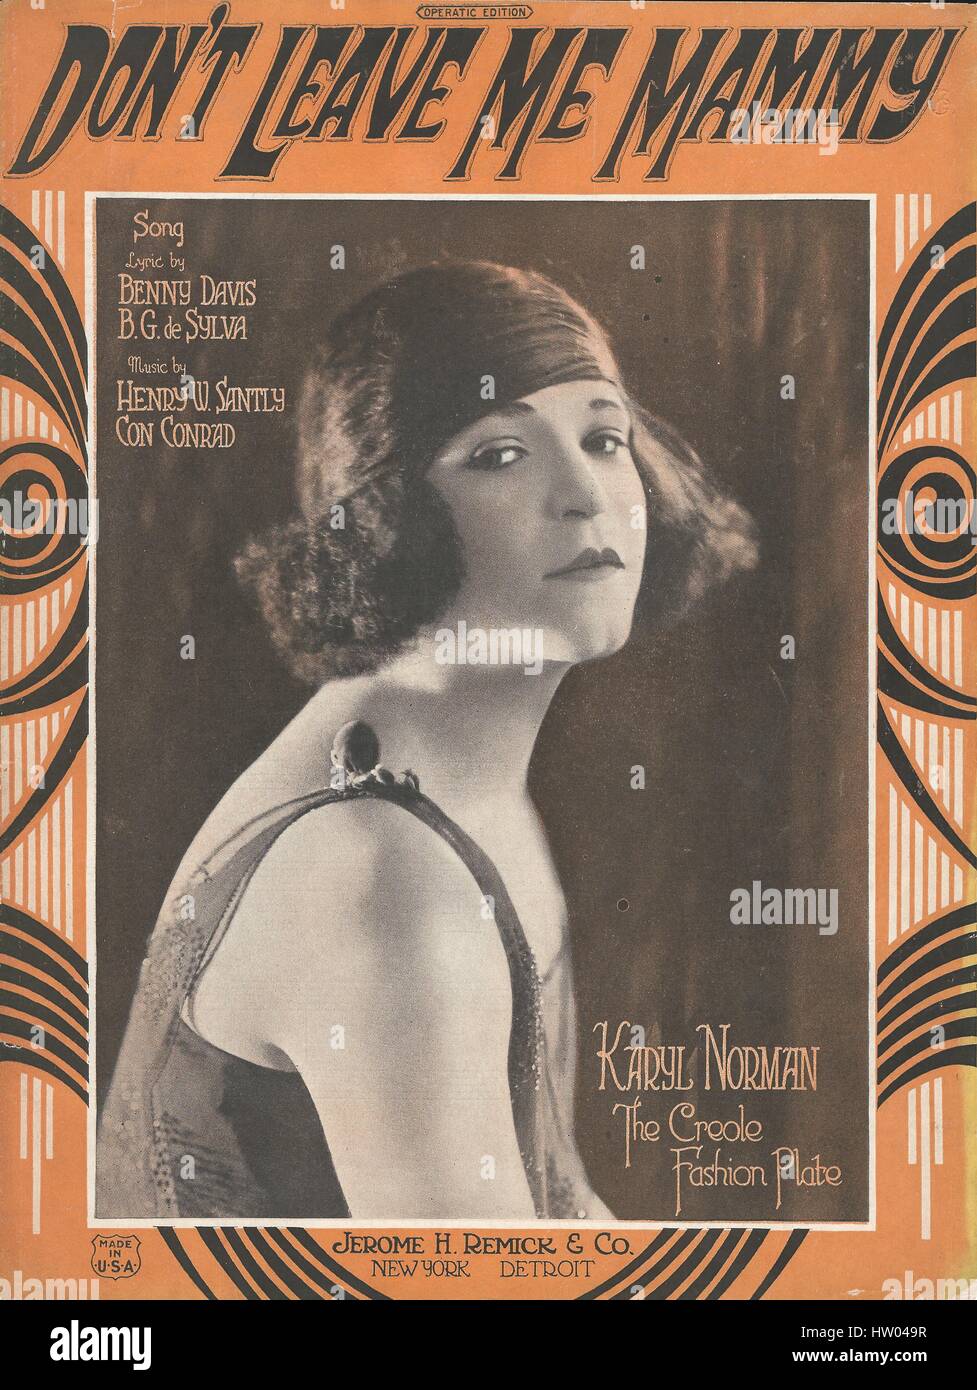 'Don't Leave Me Mammy' 1922 Karyl Norman Female Impersonator Sheet Music Cover Stock Photo